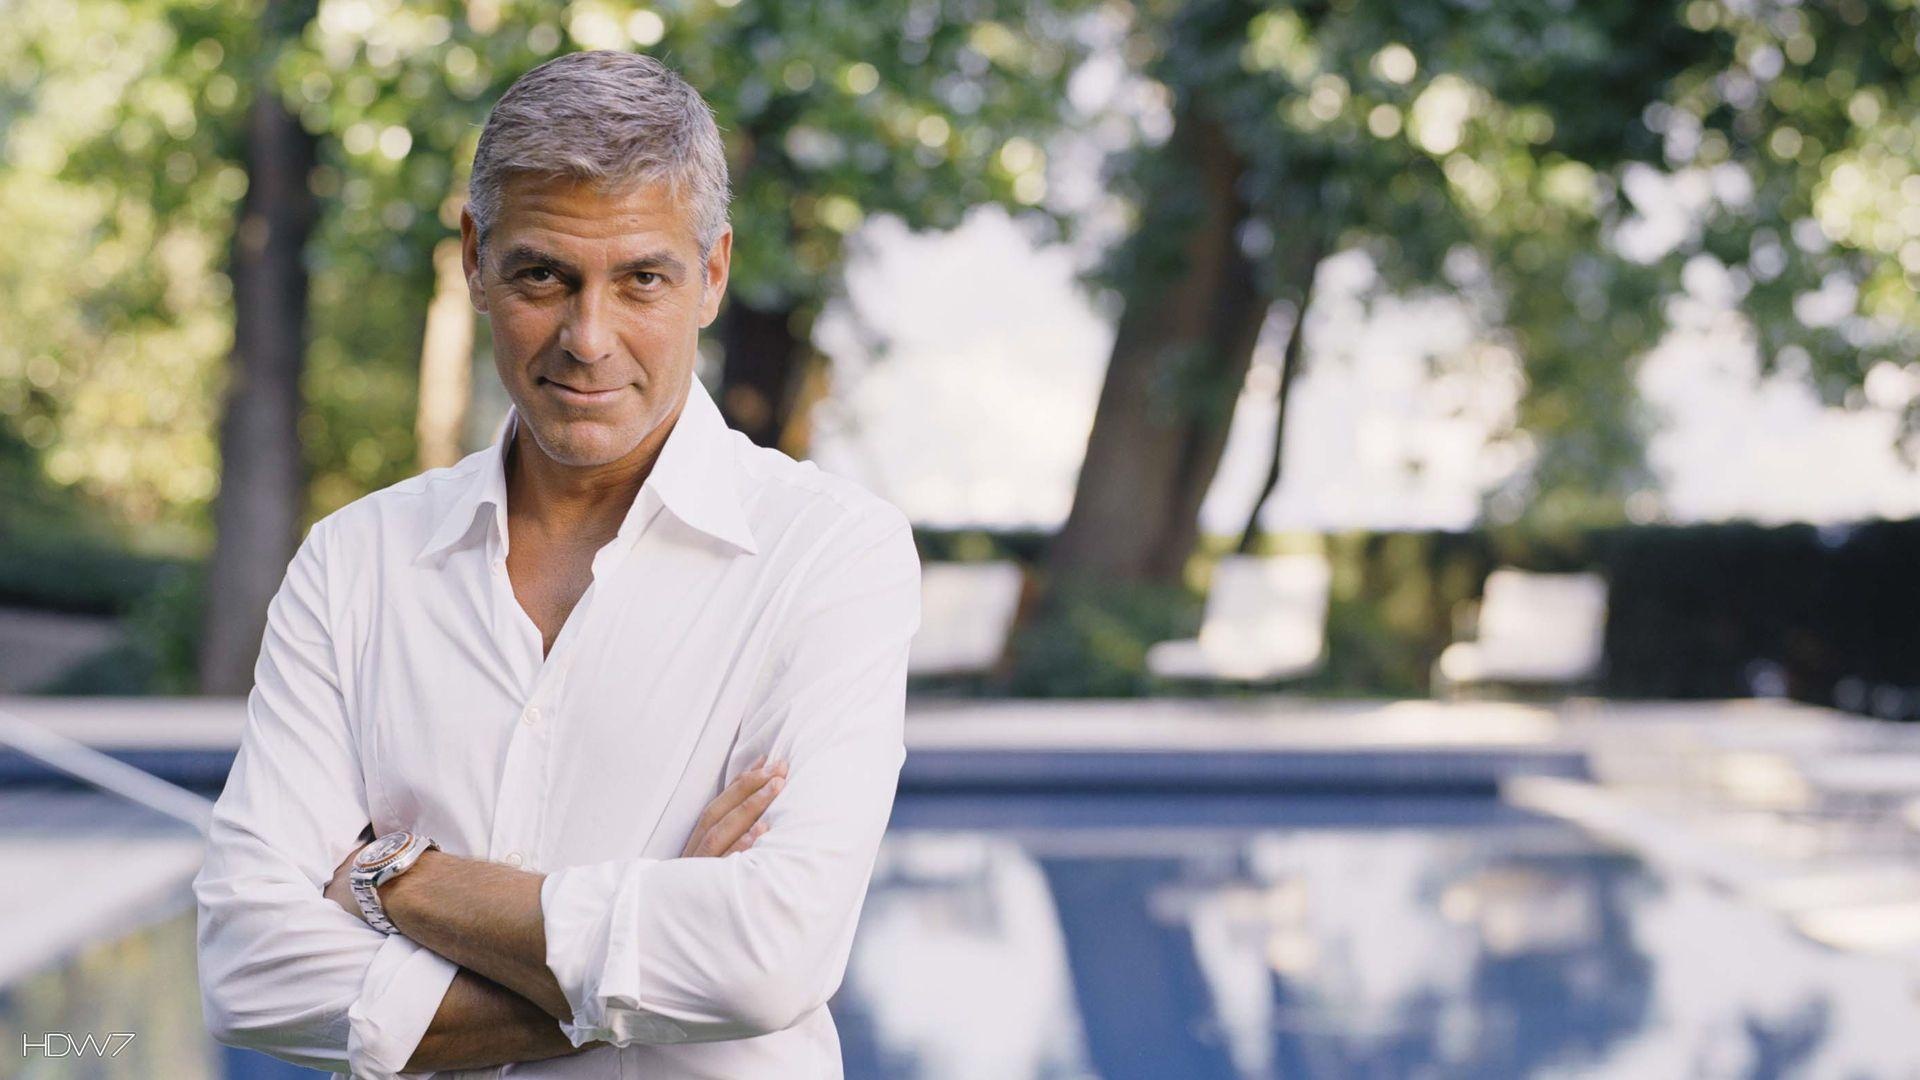 George Clooney, Iconic wallpapers, Hollywood legend, Enduring popularity, 1920x1080 Full HD Desktop